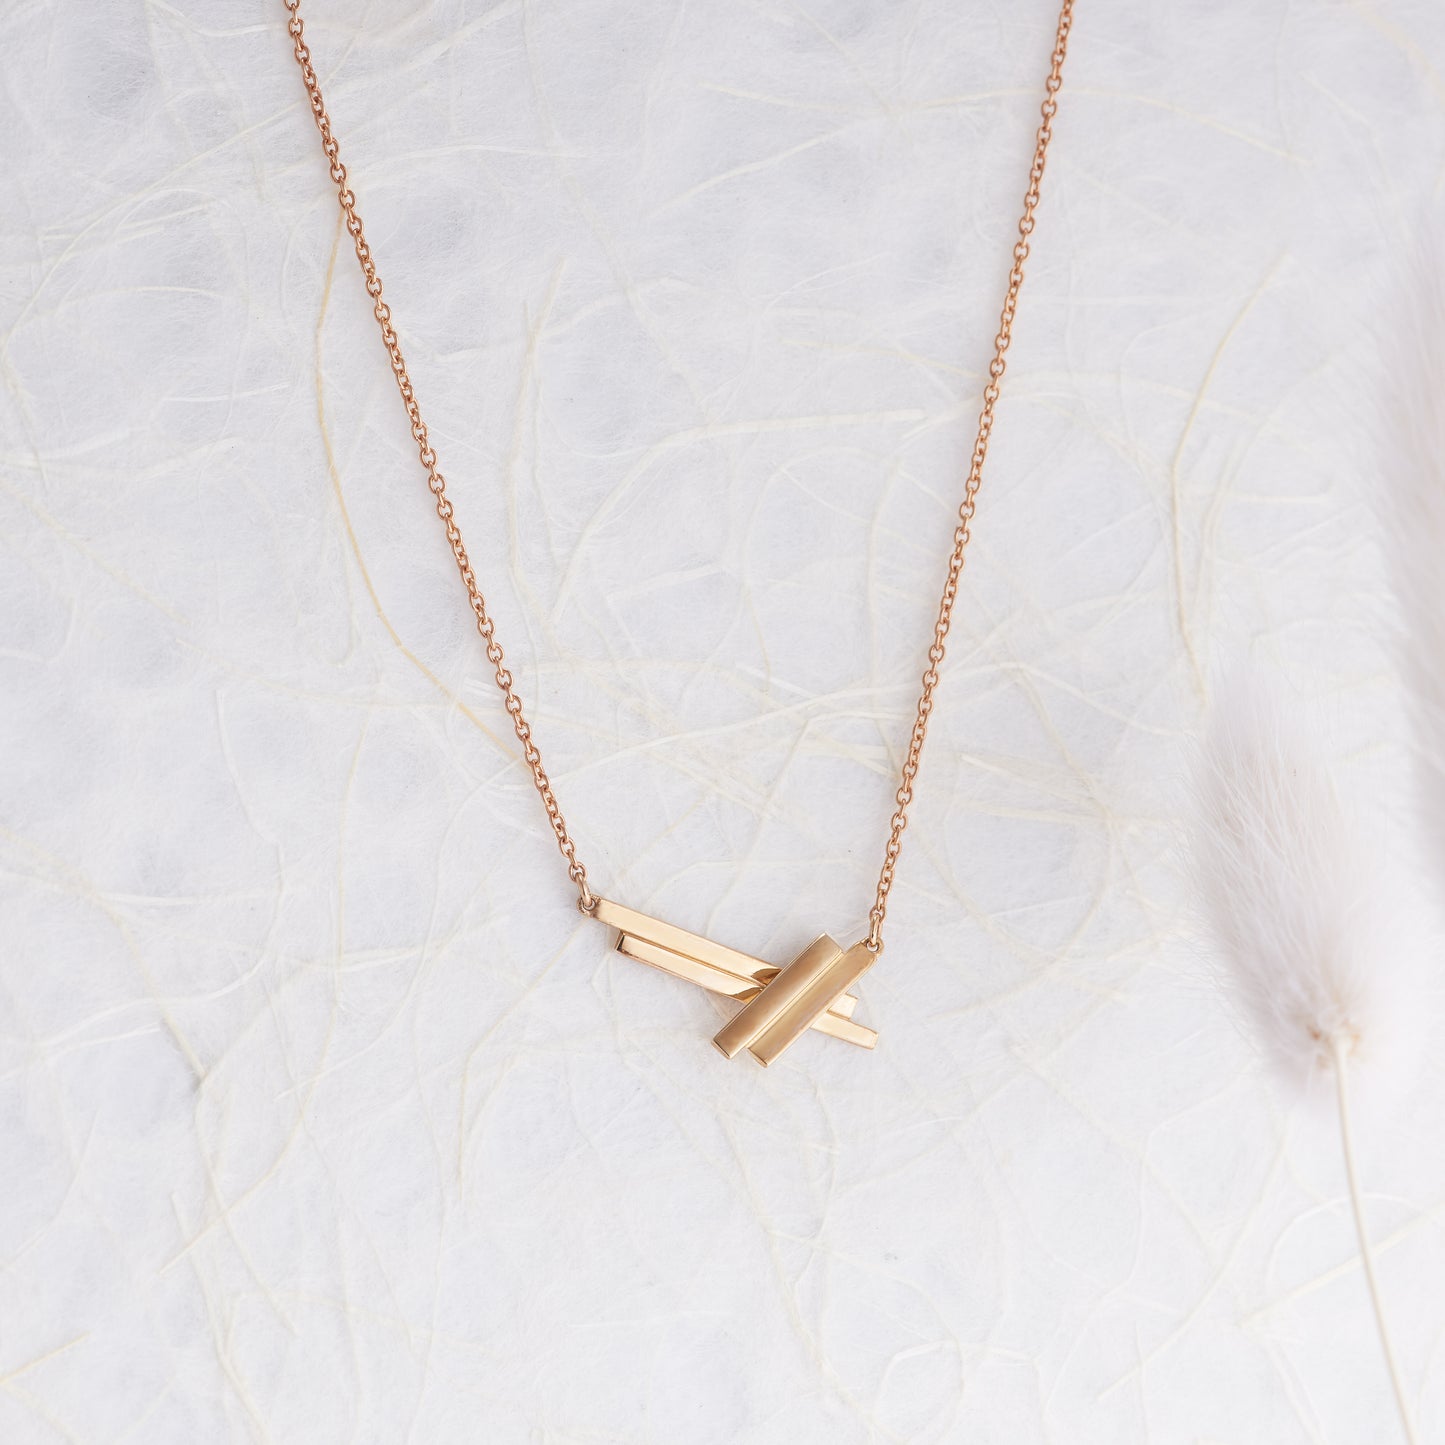 9K Yellow Gold Crossed Bars Necklace